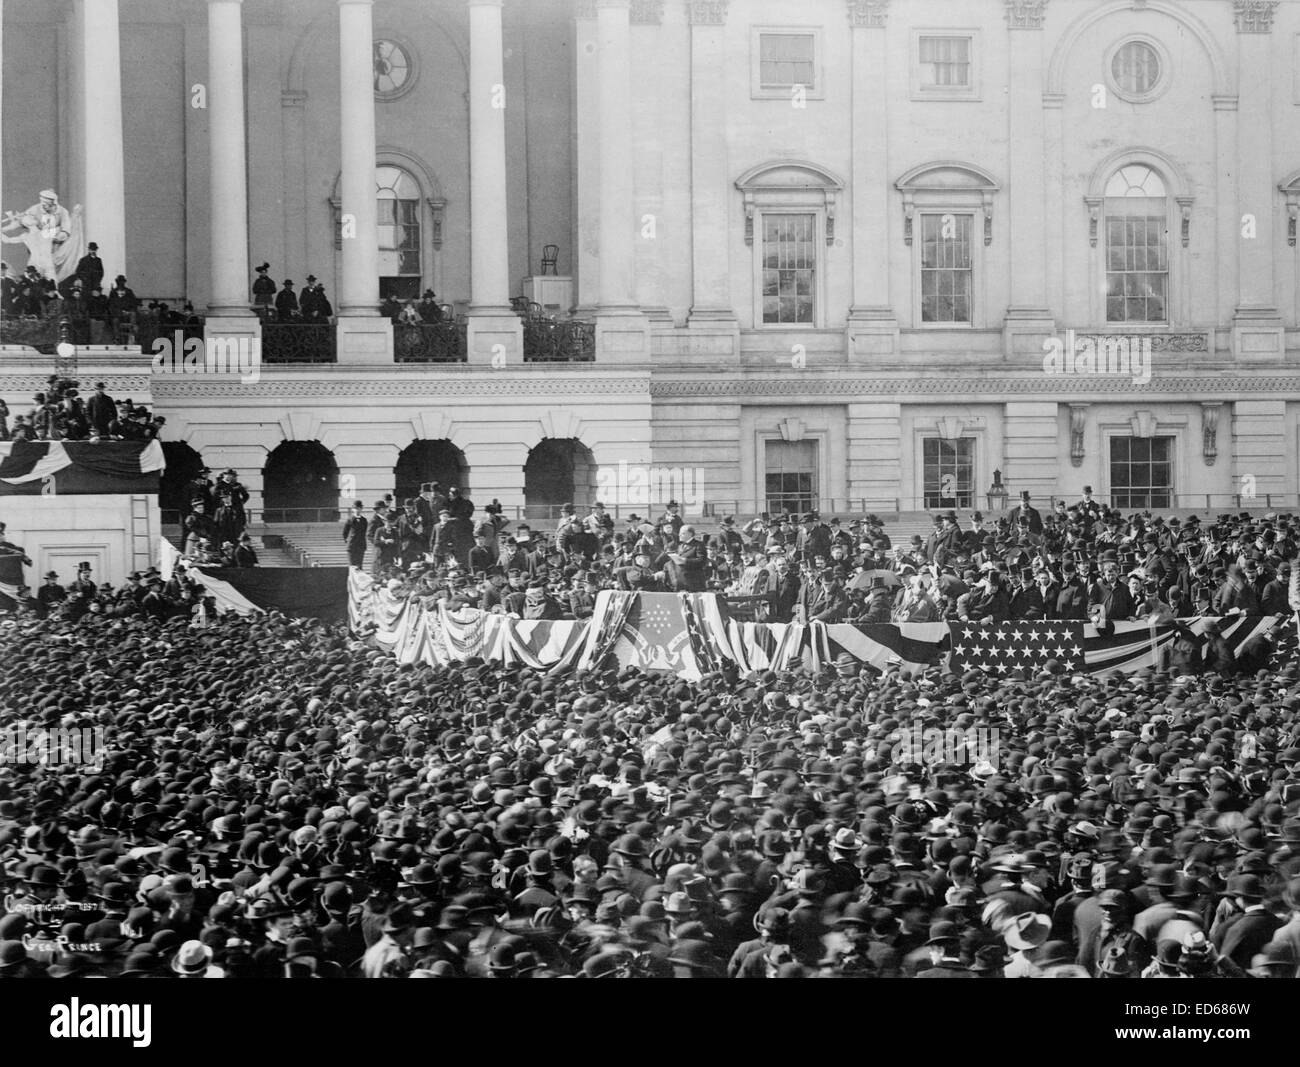 President McKinley making his inaugural address near Senate wing of east portico of U.S. Capitol., March 4, 1897. Inauguration Stock Photo